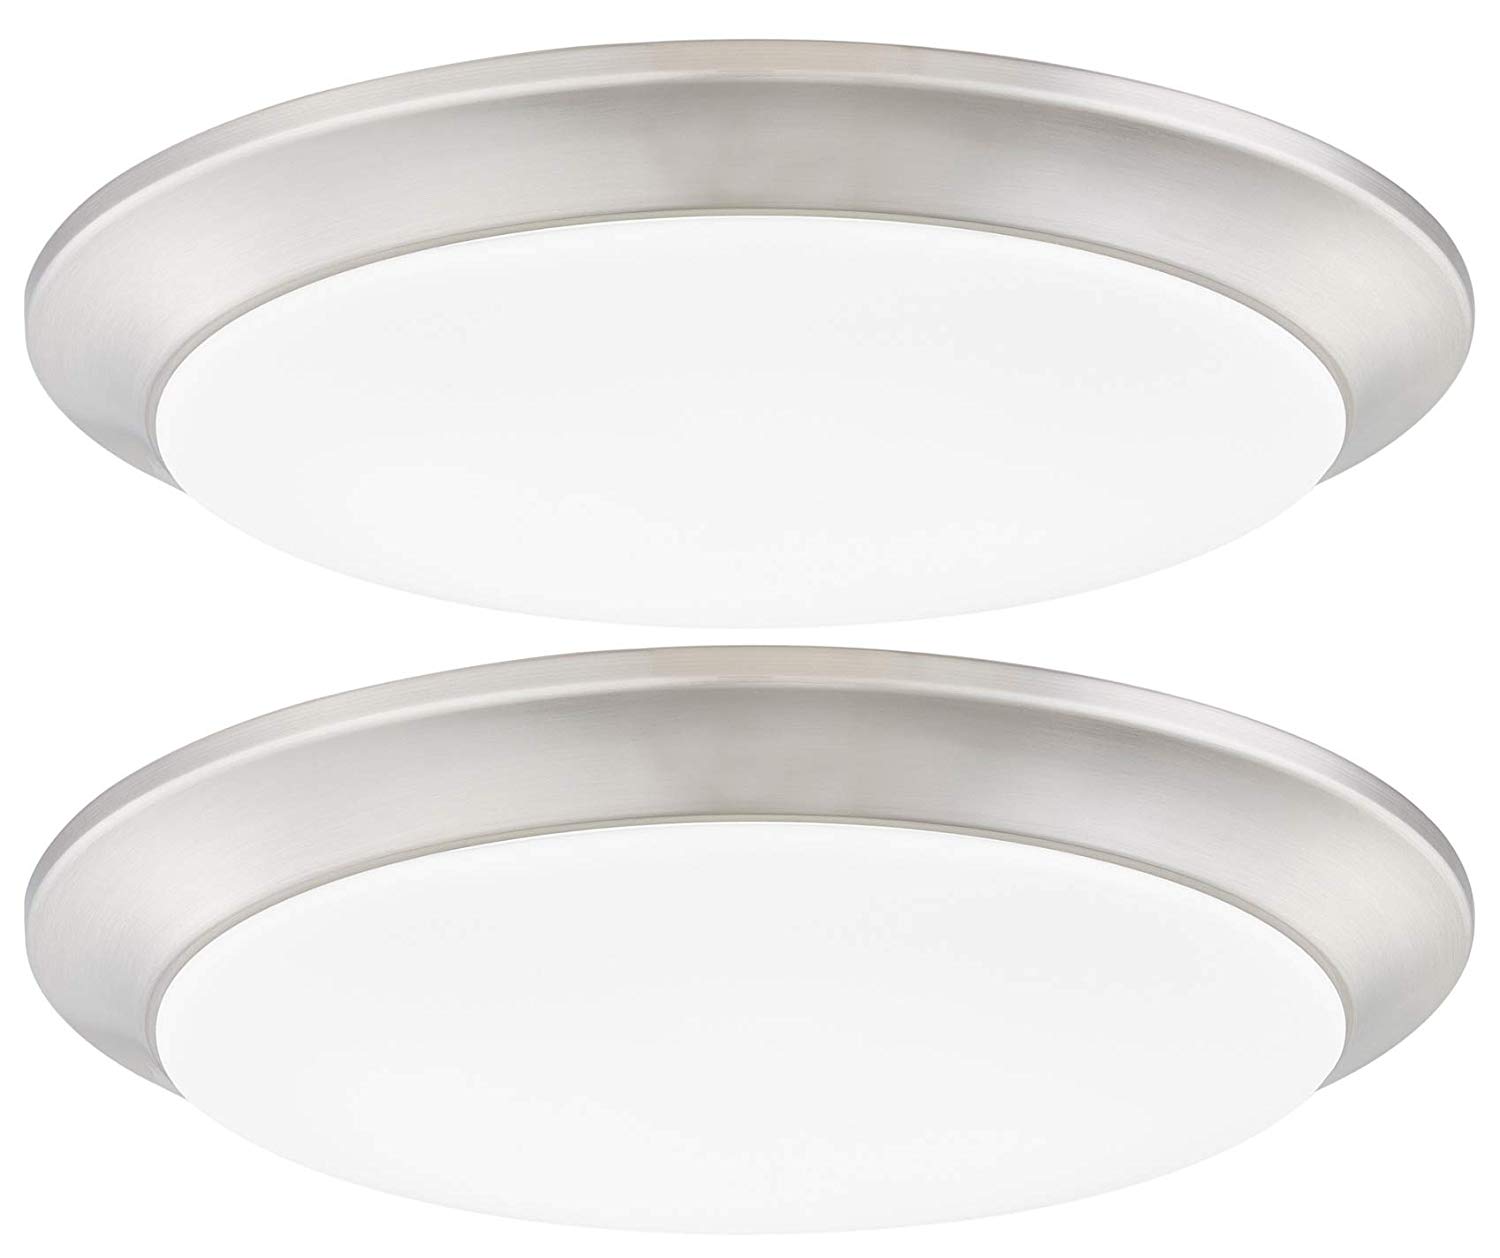 GRUENLICH LED Flush Mount Ceiling Lighting Fixture, 11 Inch Dimmable 19W (125W Replacement) 1170 Lumen, Metal Housing with Nickel Finish, ETL and Damp Location Rated, 2-Pack